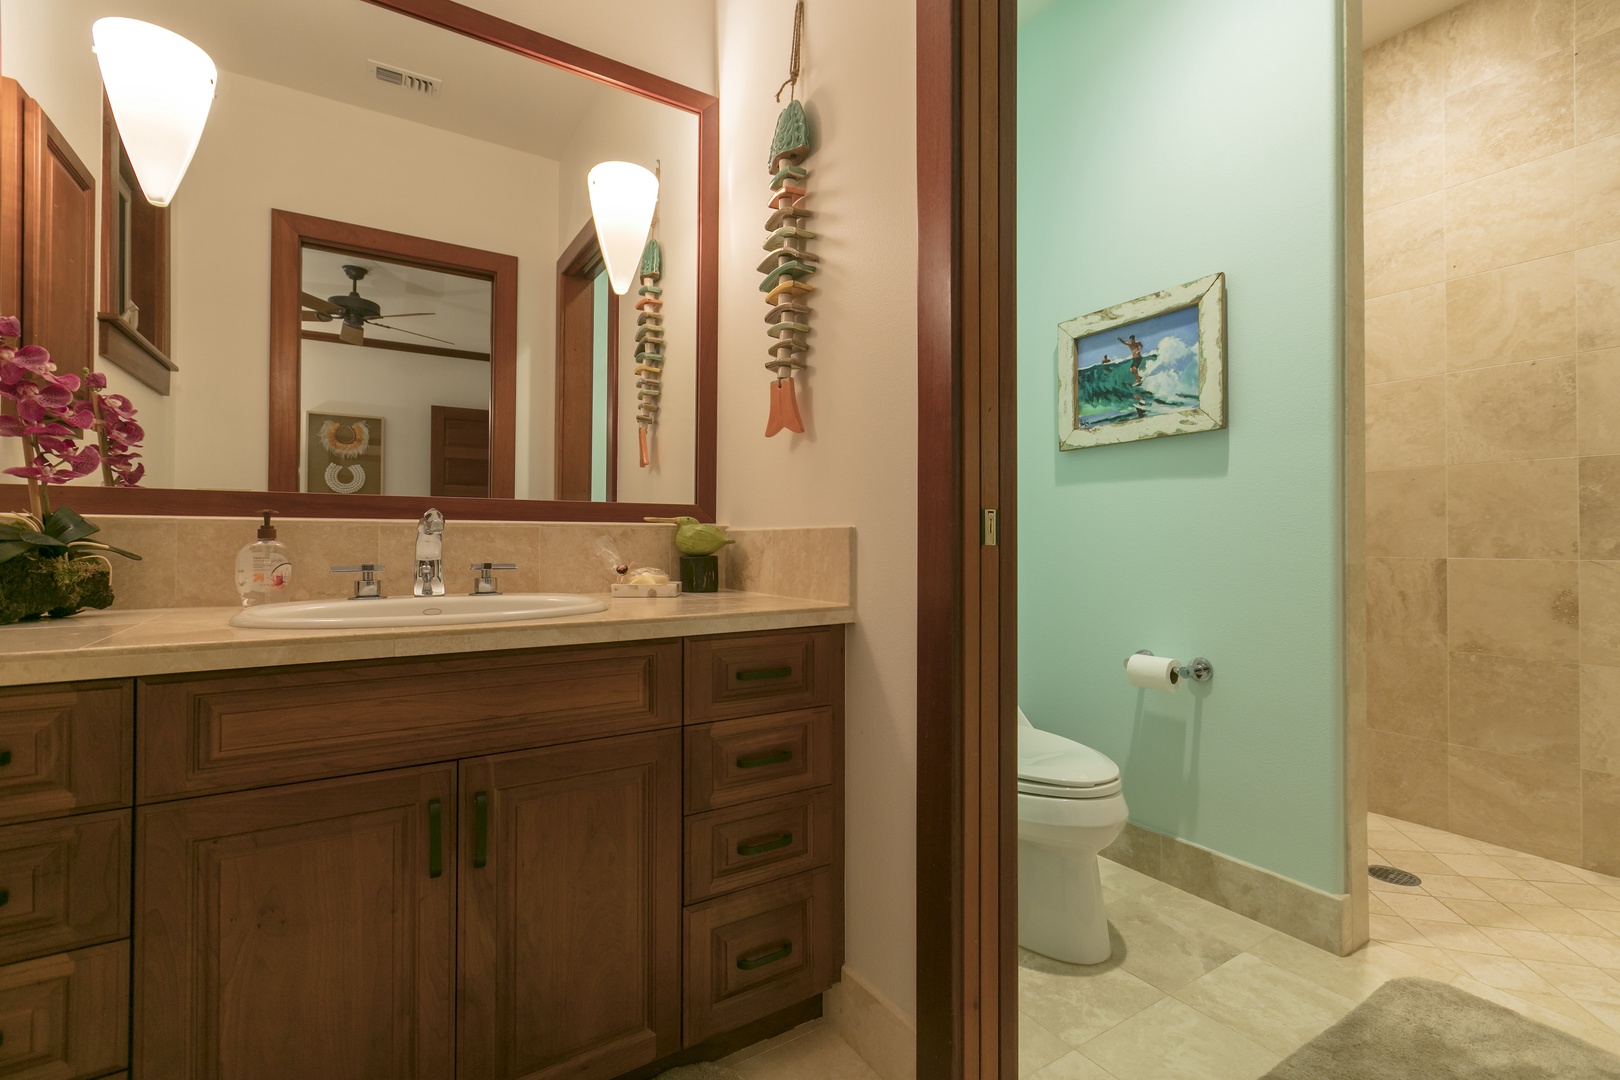 Kamuela Vacation Rentals, Villages at Mauna Lani Resort Unit # 728 - 2nd Primary bathroom with walk in shower